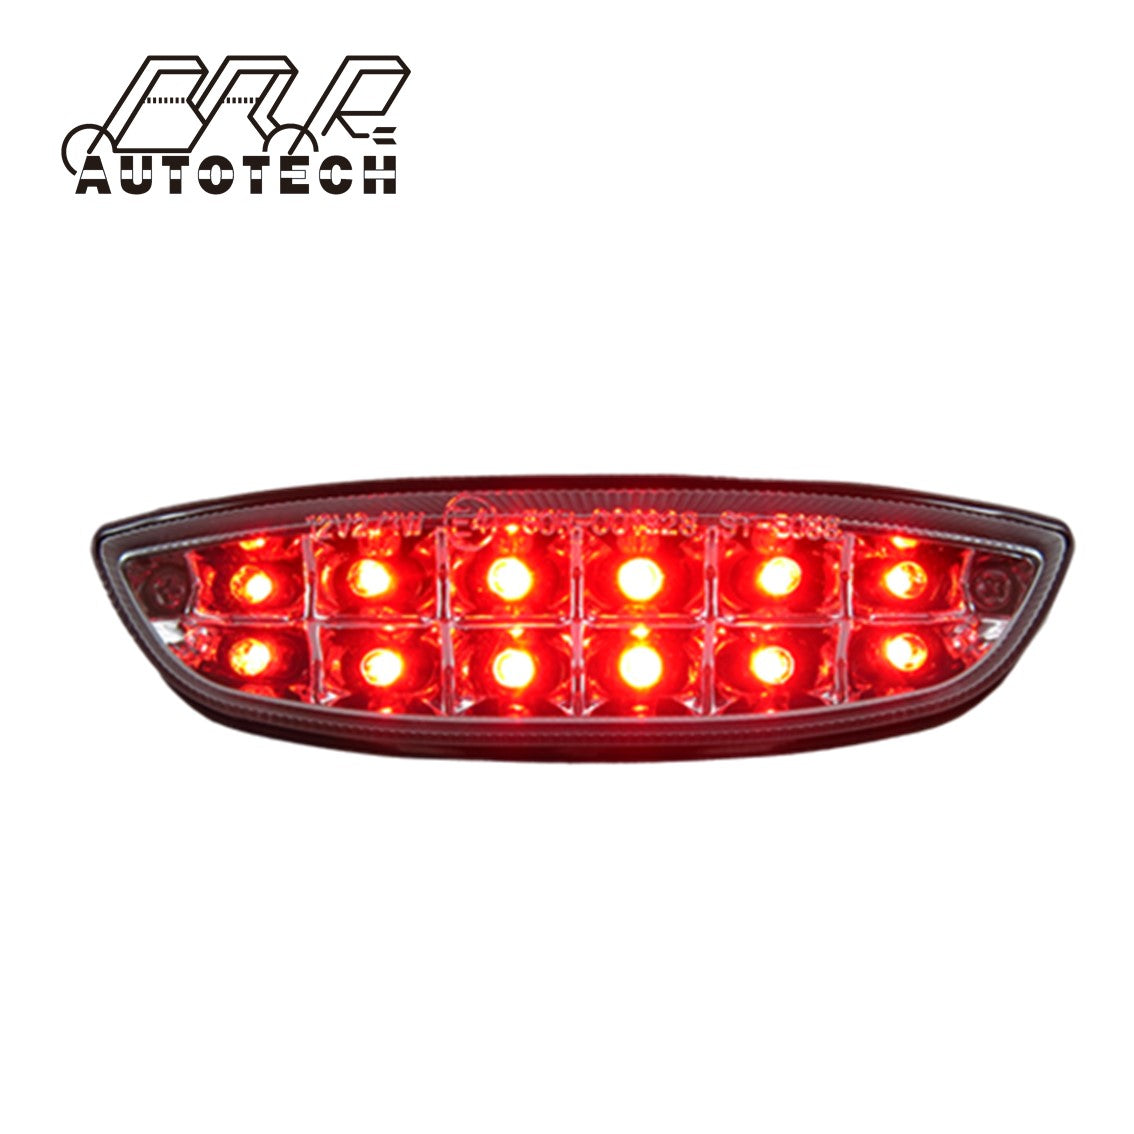 LED motorcycle tail lights For Yamaha with turn signal YZF R125 2008-2010